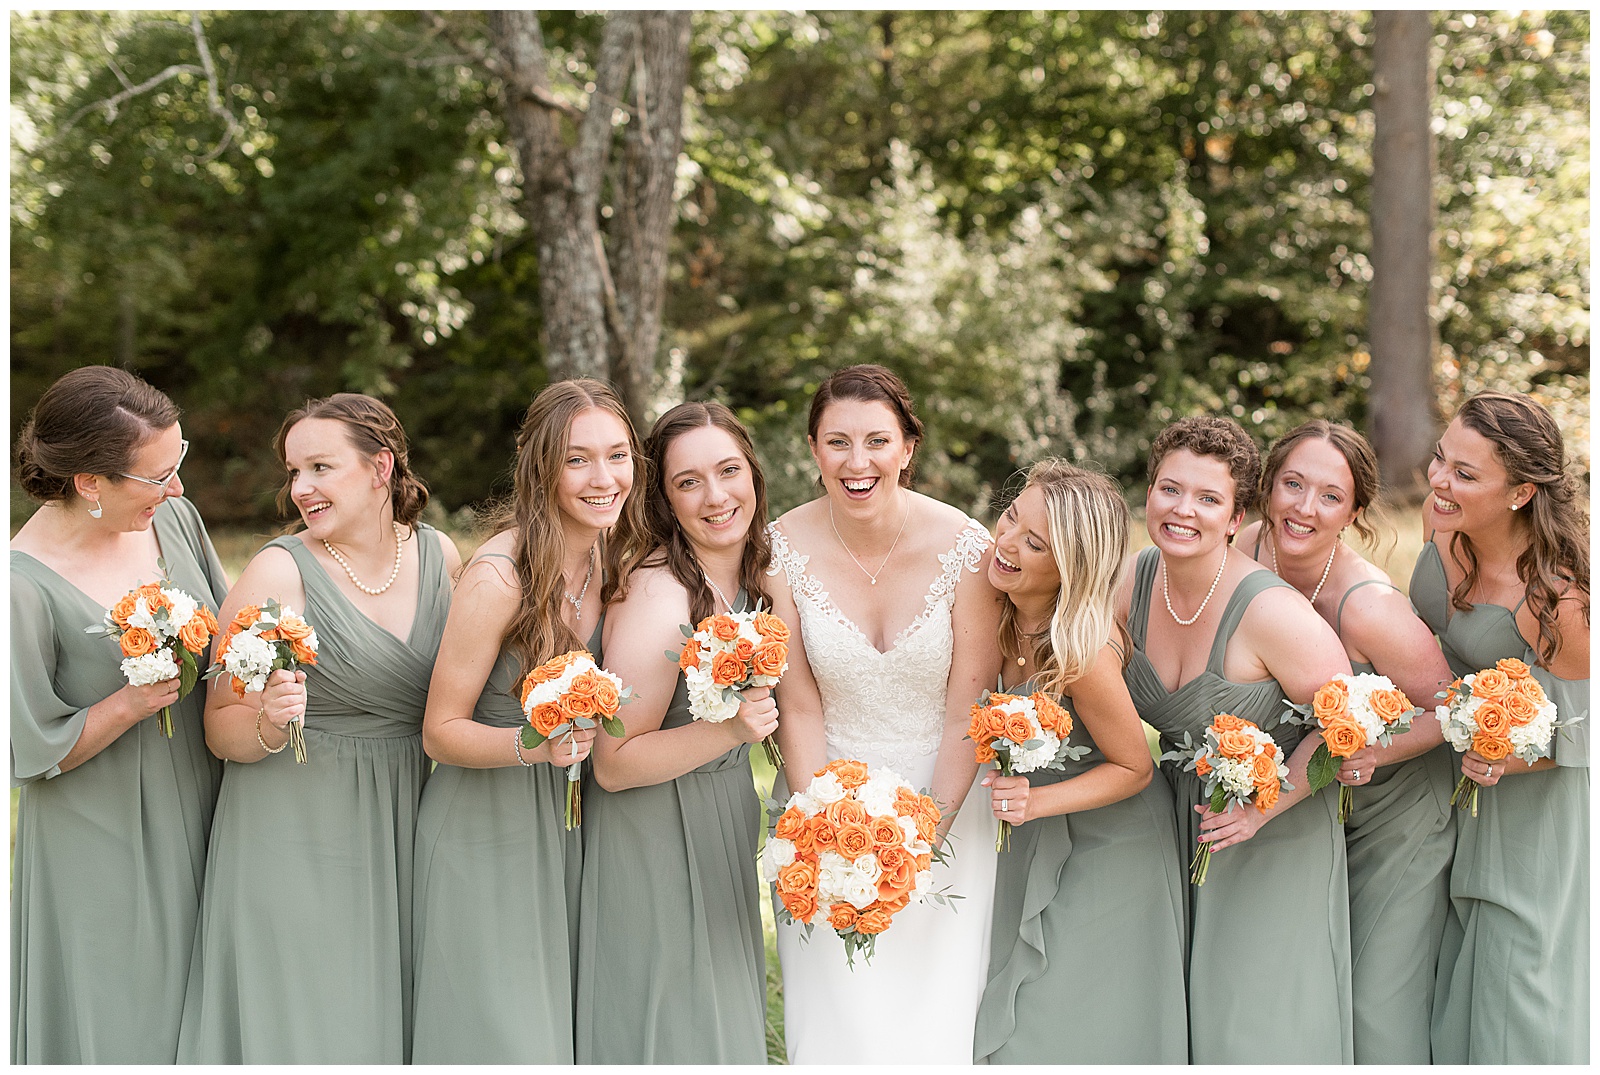 bride in white wedding gown surrounded by bridesmaids wearing light green dresses all lean in and smile at camera as they hold orange and white bouquets